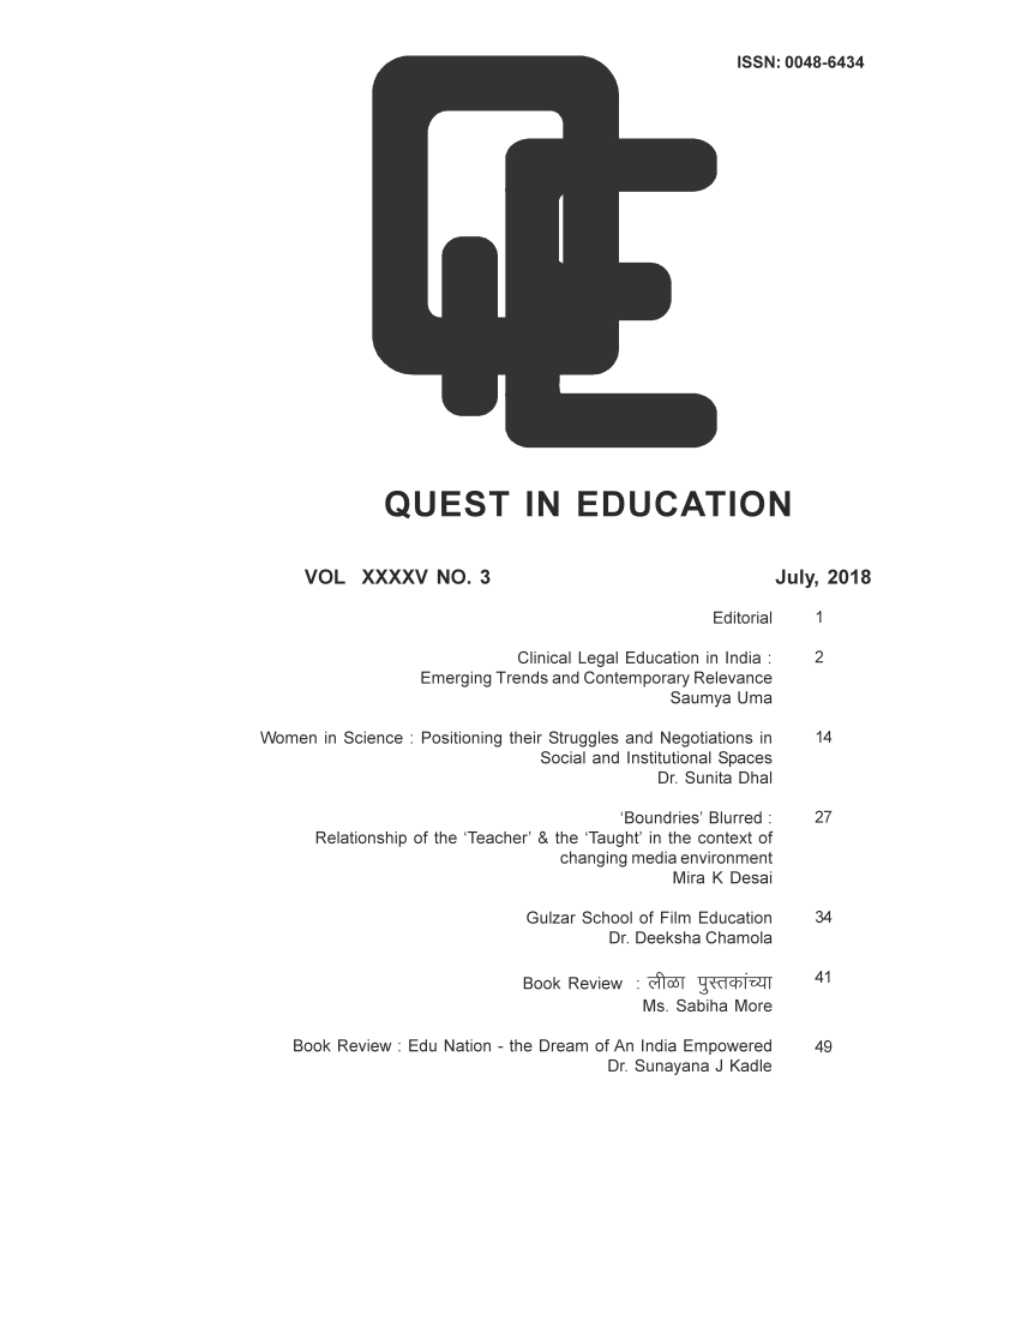 Quest in Education July 2018